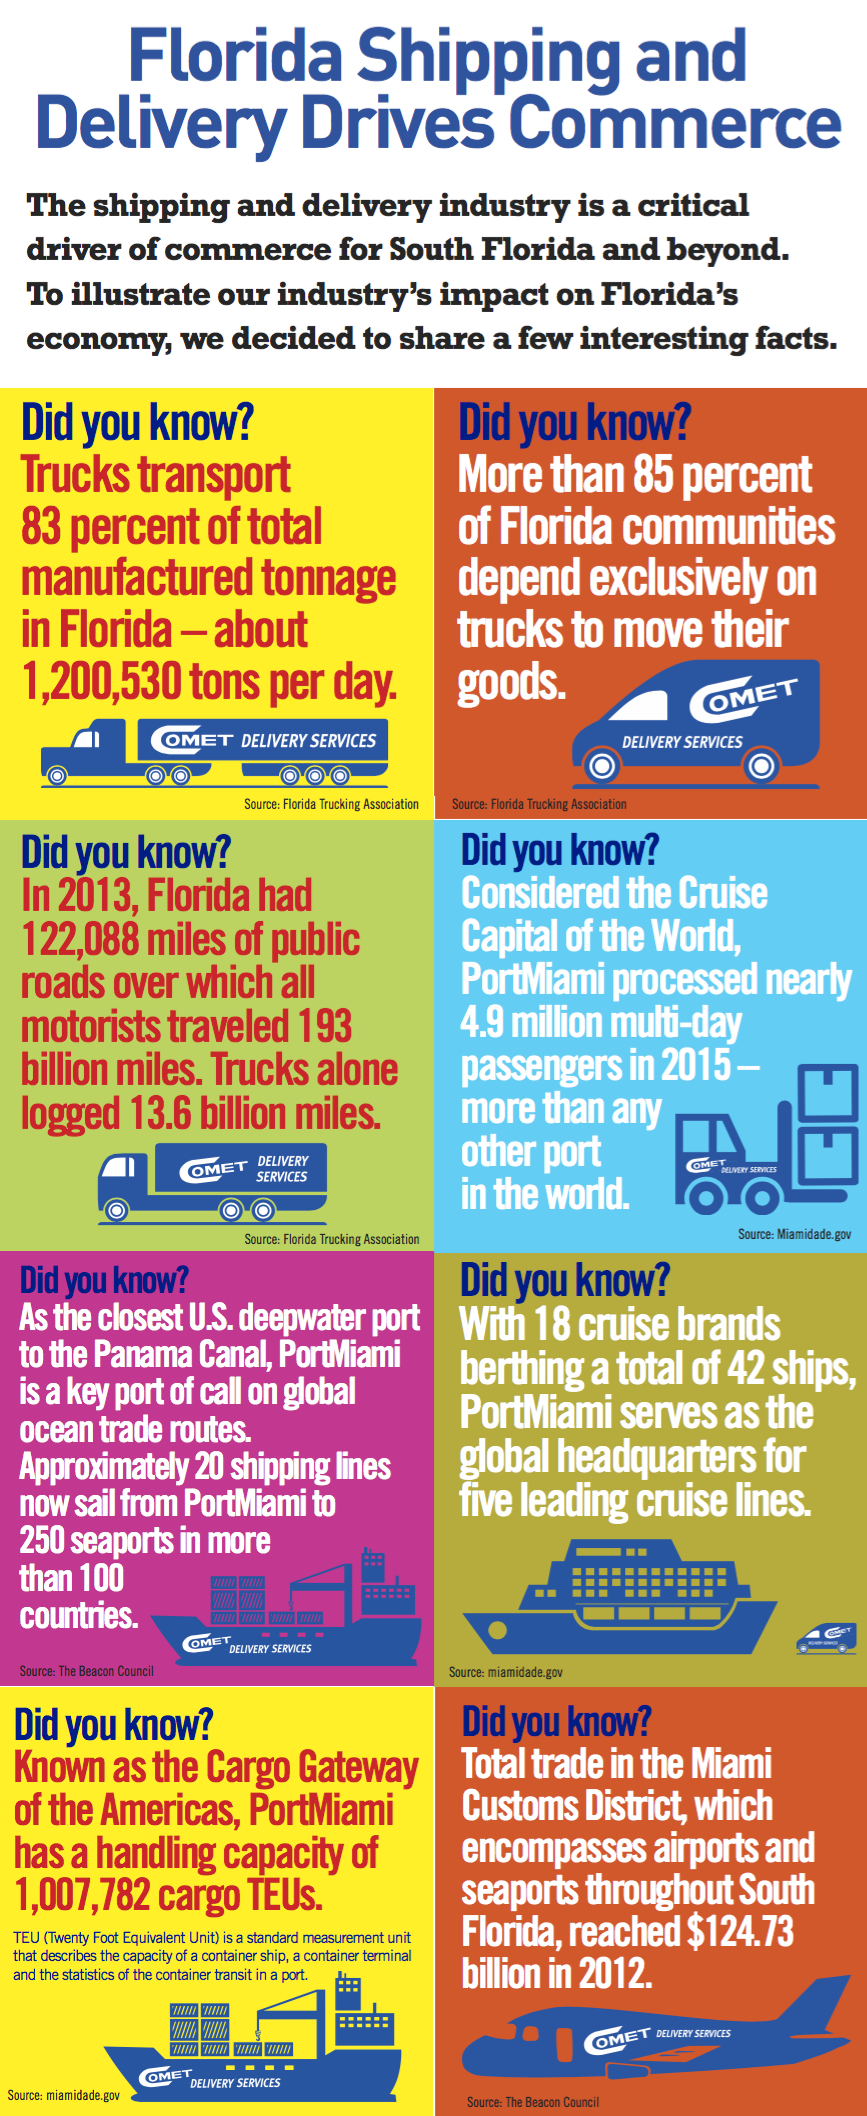 Florida Shipping and Delivery Drives Commerce